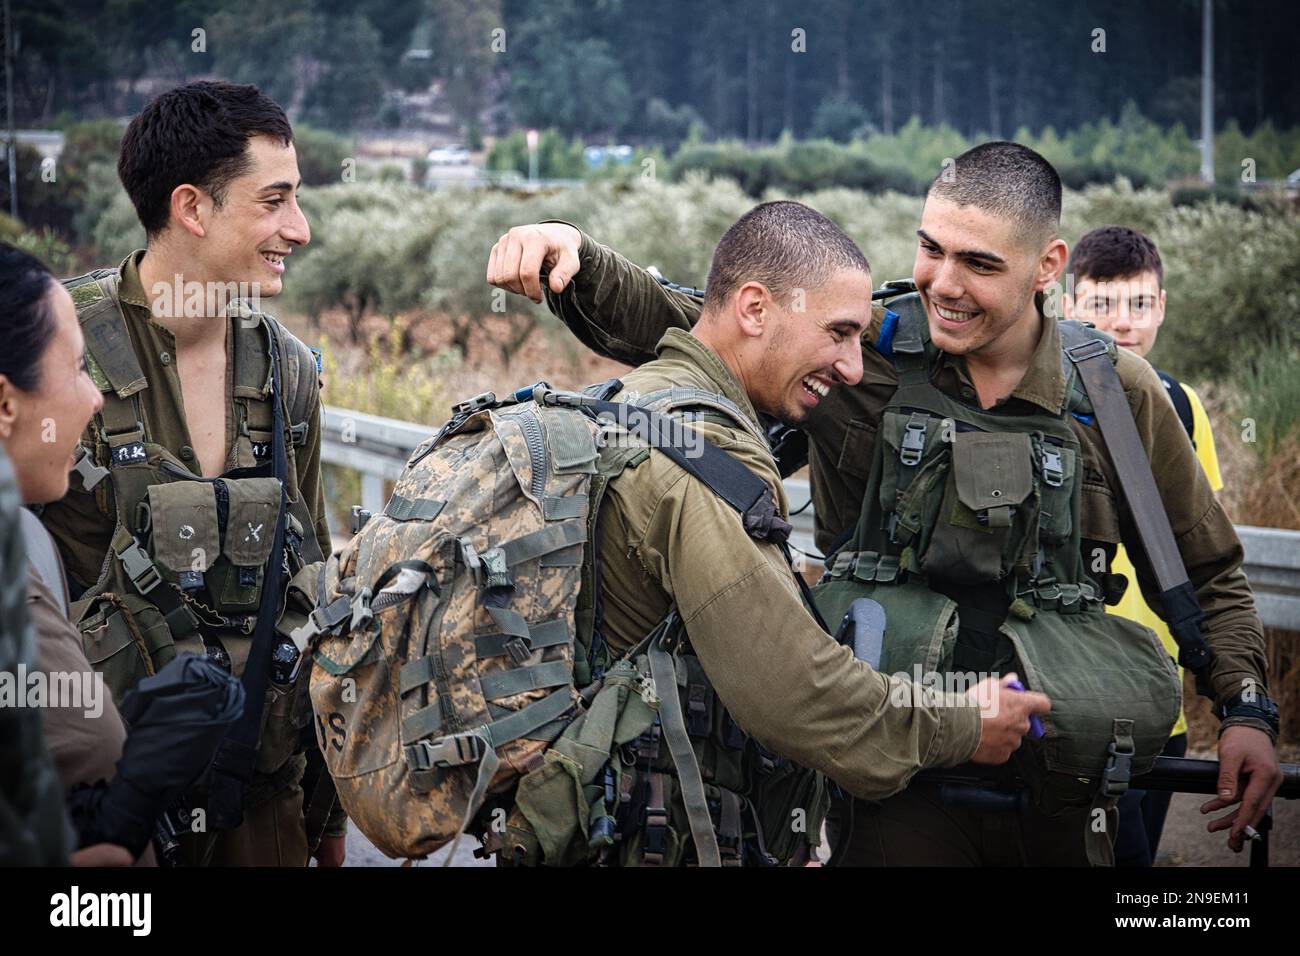 The Golani soldiers laughing and hugging in the city of Golani Junction, Israel Stock Photo